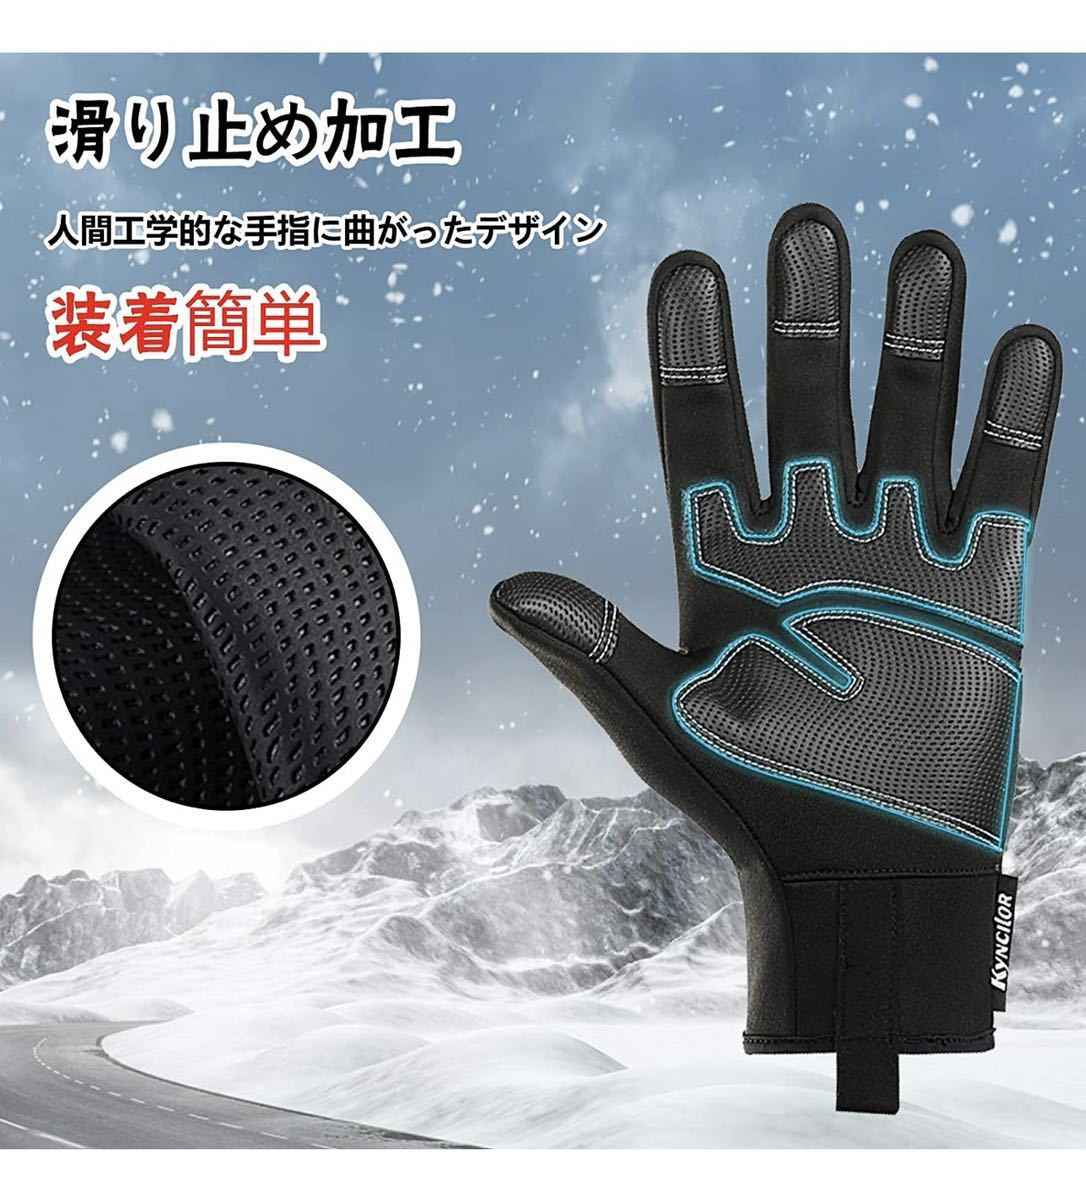  outdoor glove protection against cold gloves touch panel strengthen waterproof zipper with pocket L